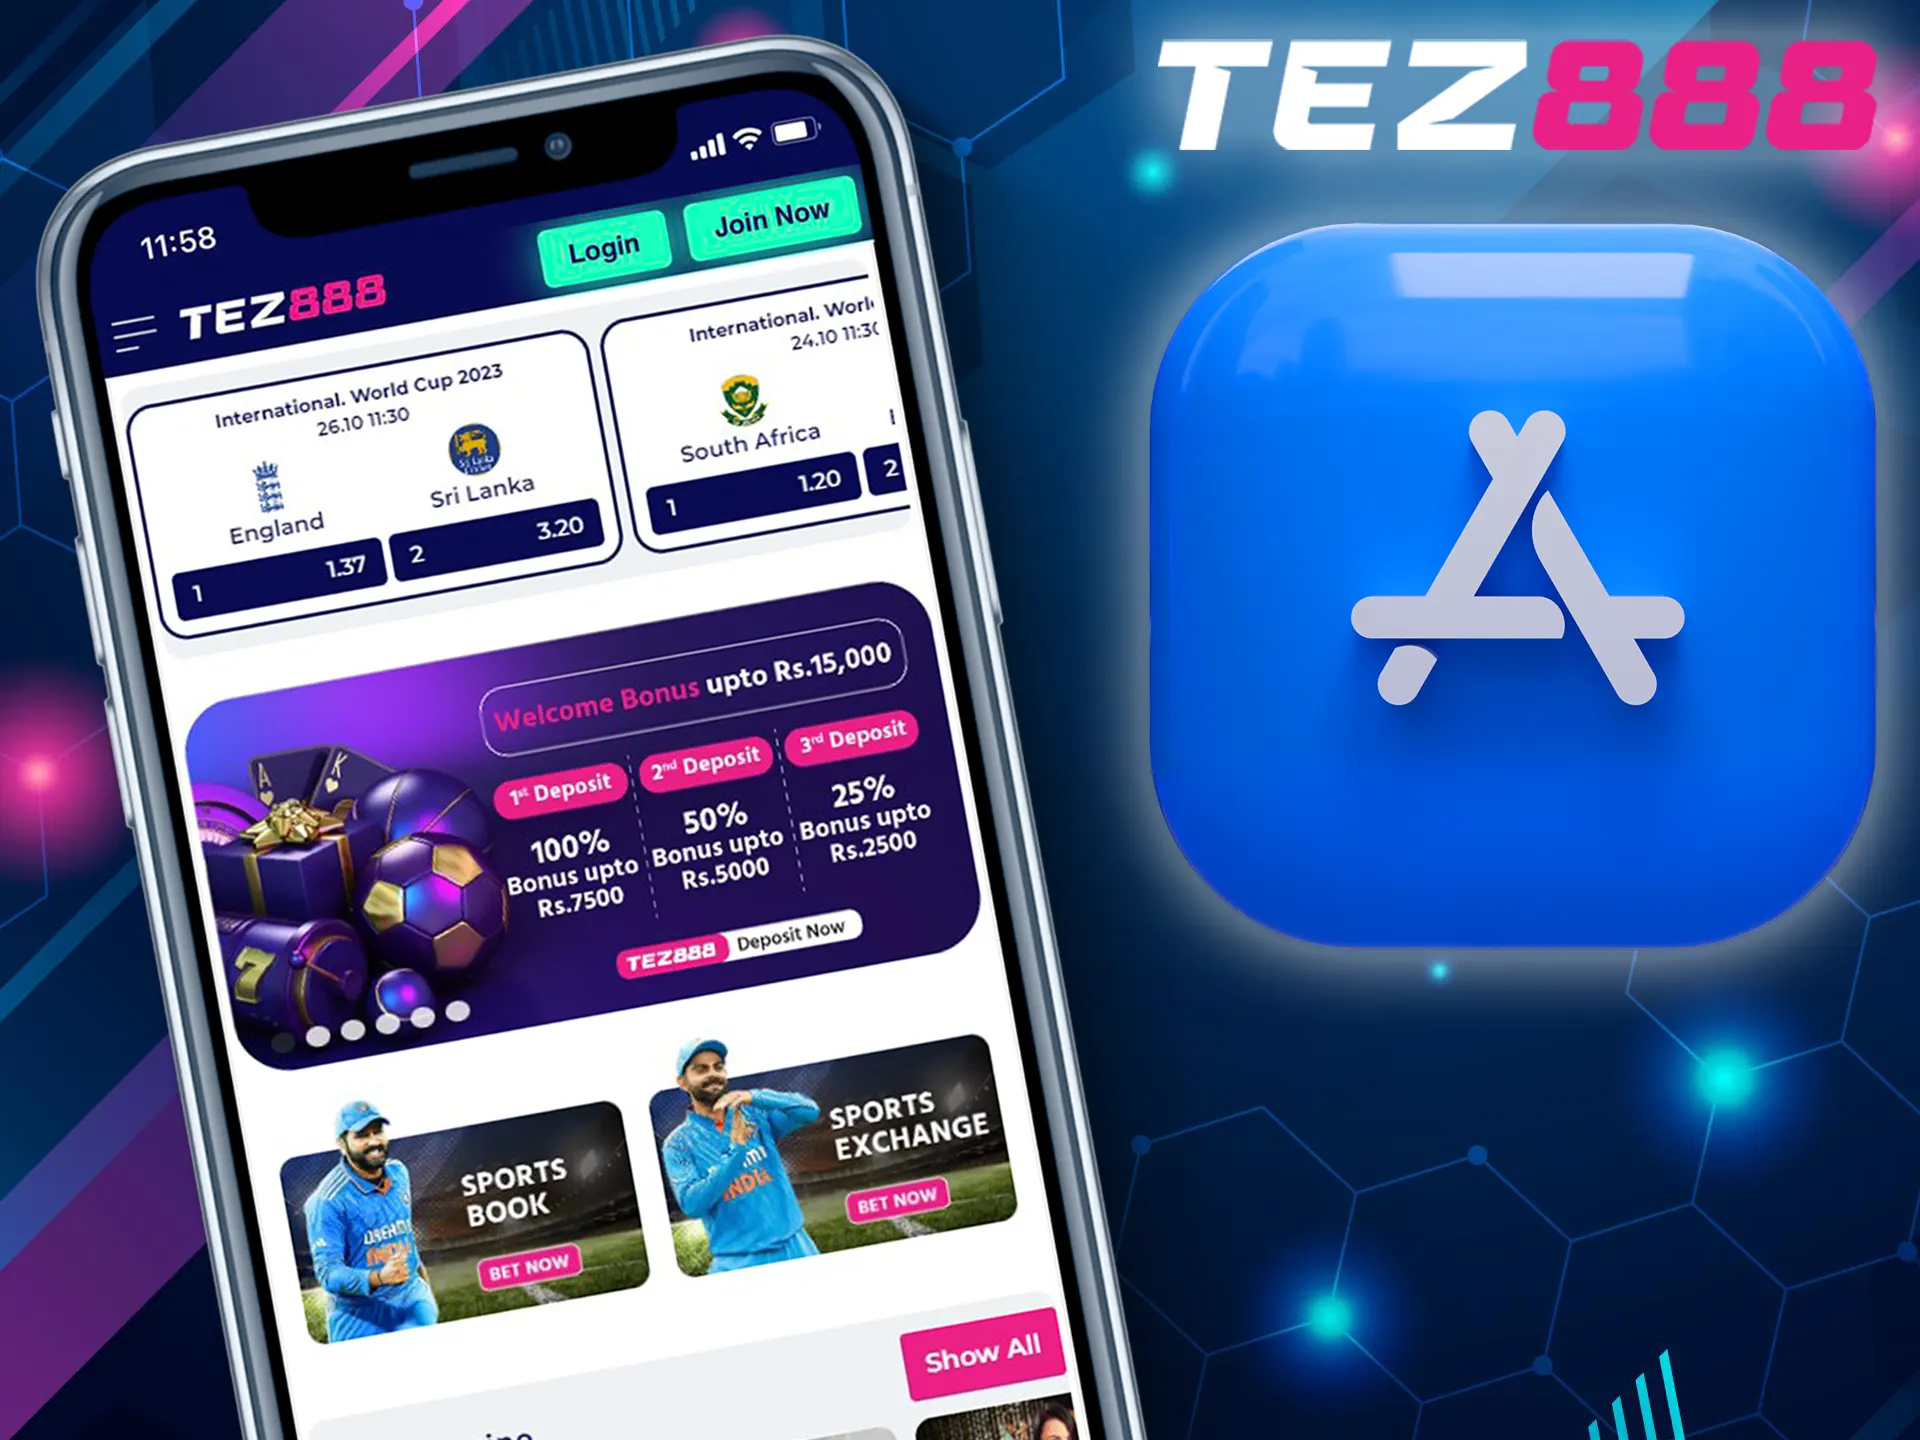 Install the tez888 app on your iOS device.